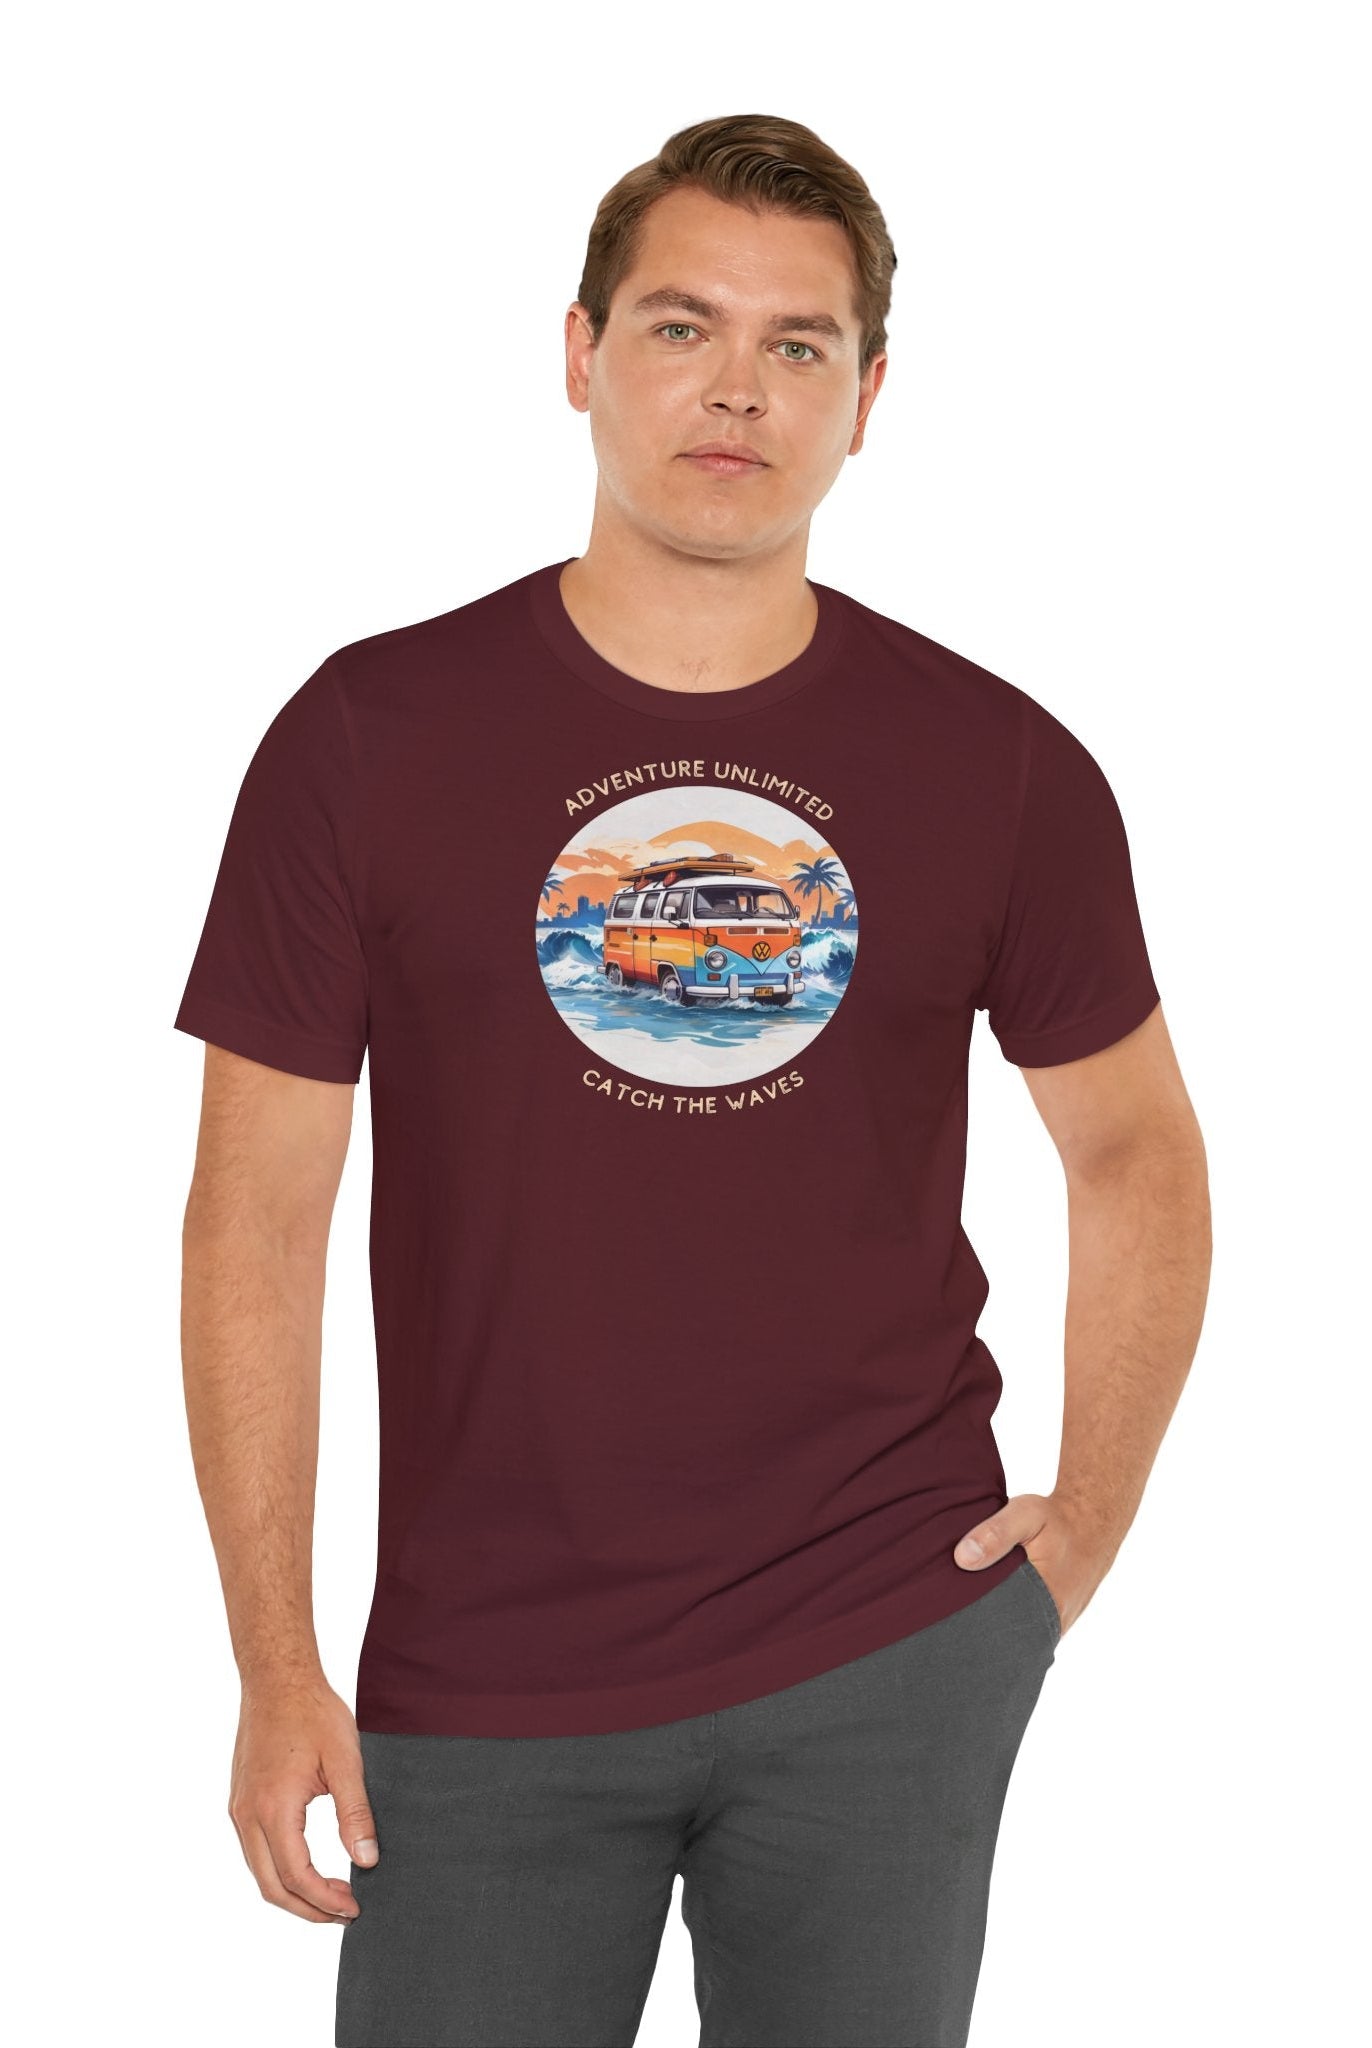 Adventure Unlimited Surfing T-Shirt in Maroon - Printed Direct-to-Garment by Soulshinecreators